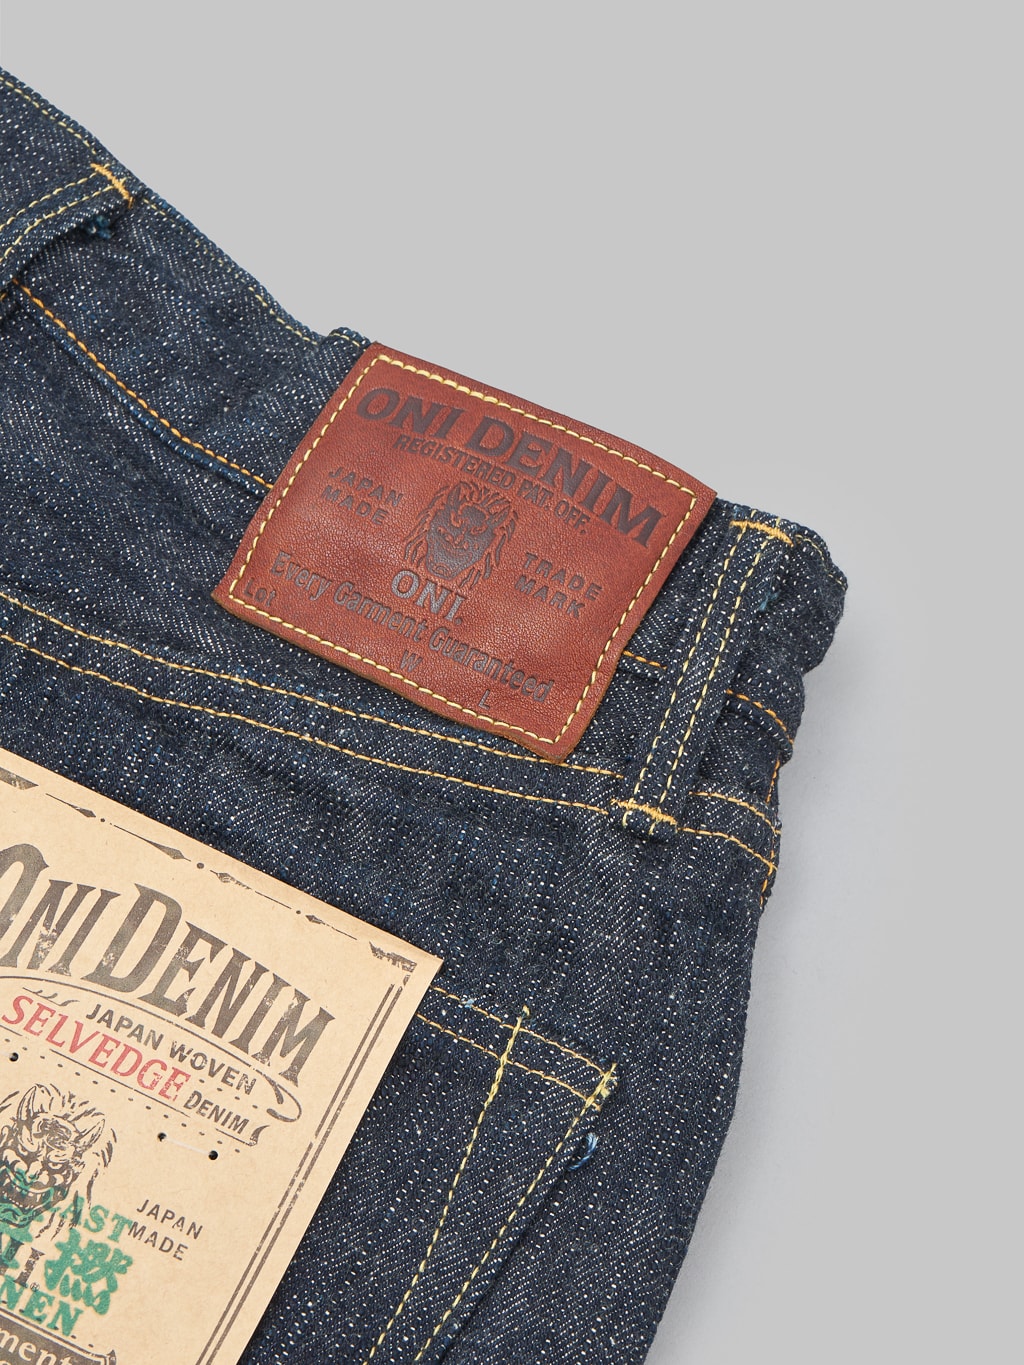 Oni denim kihannen relaxed tapered jeans brand leather patch